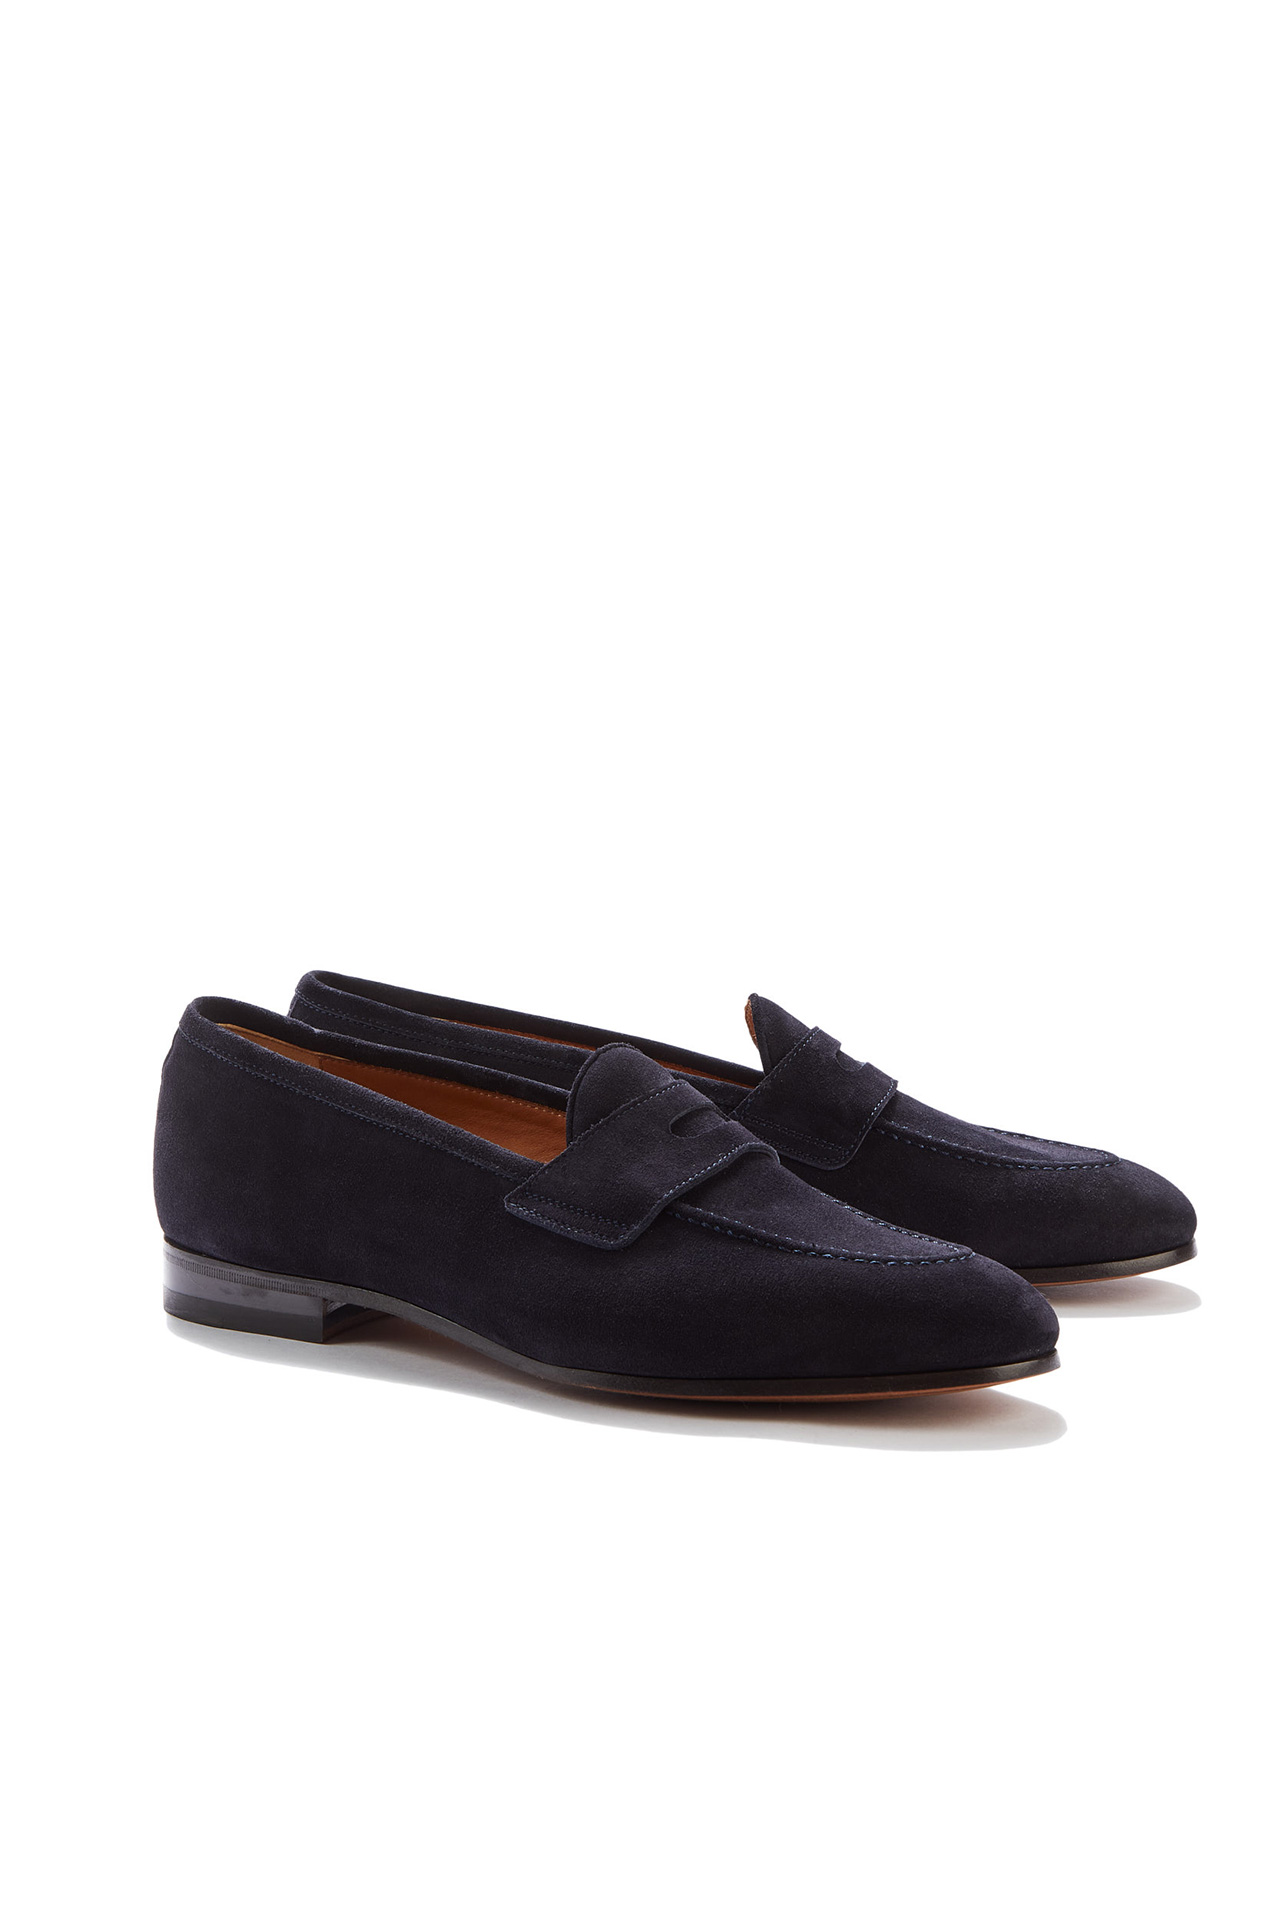 Lawrence Dark Blue Suede Penny Loafers - Barbanera